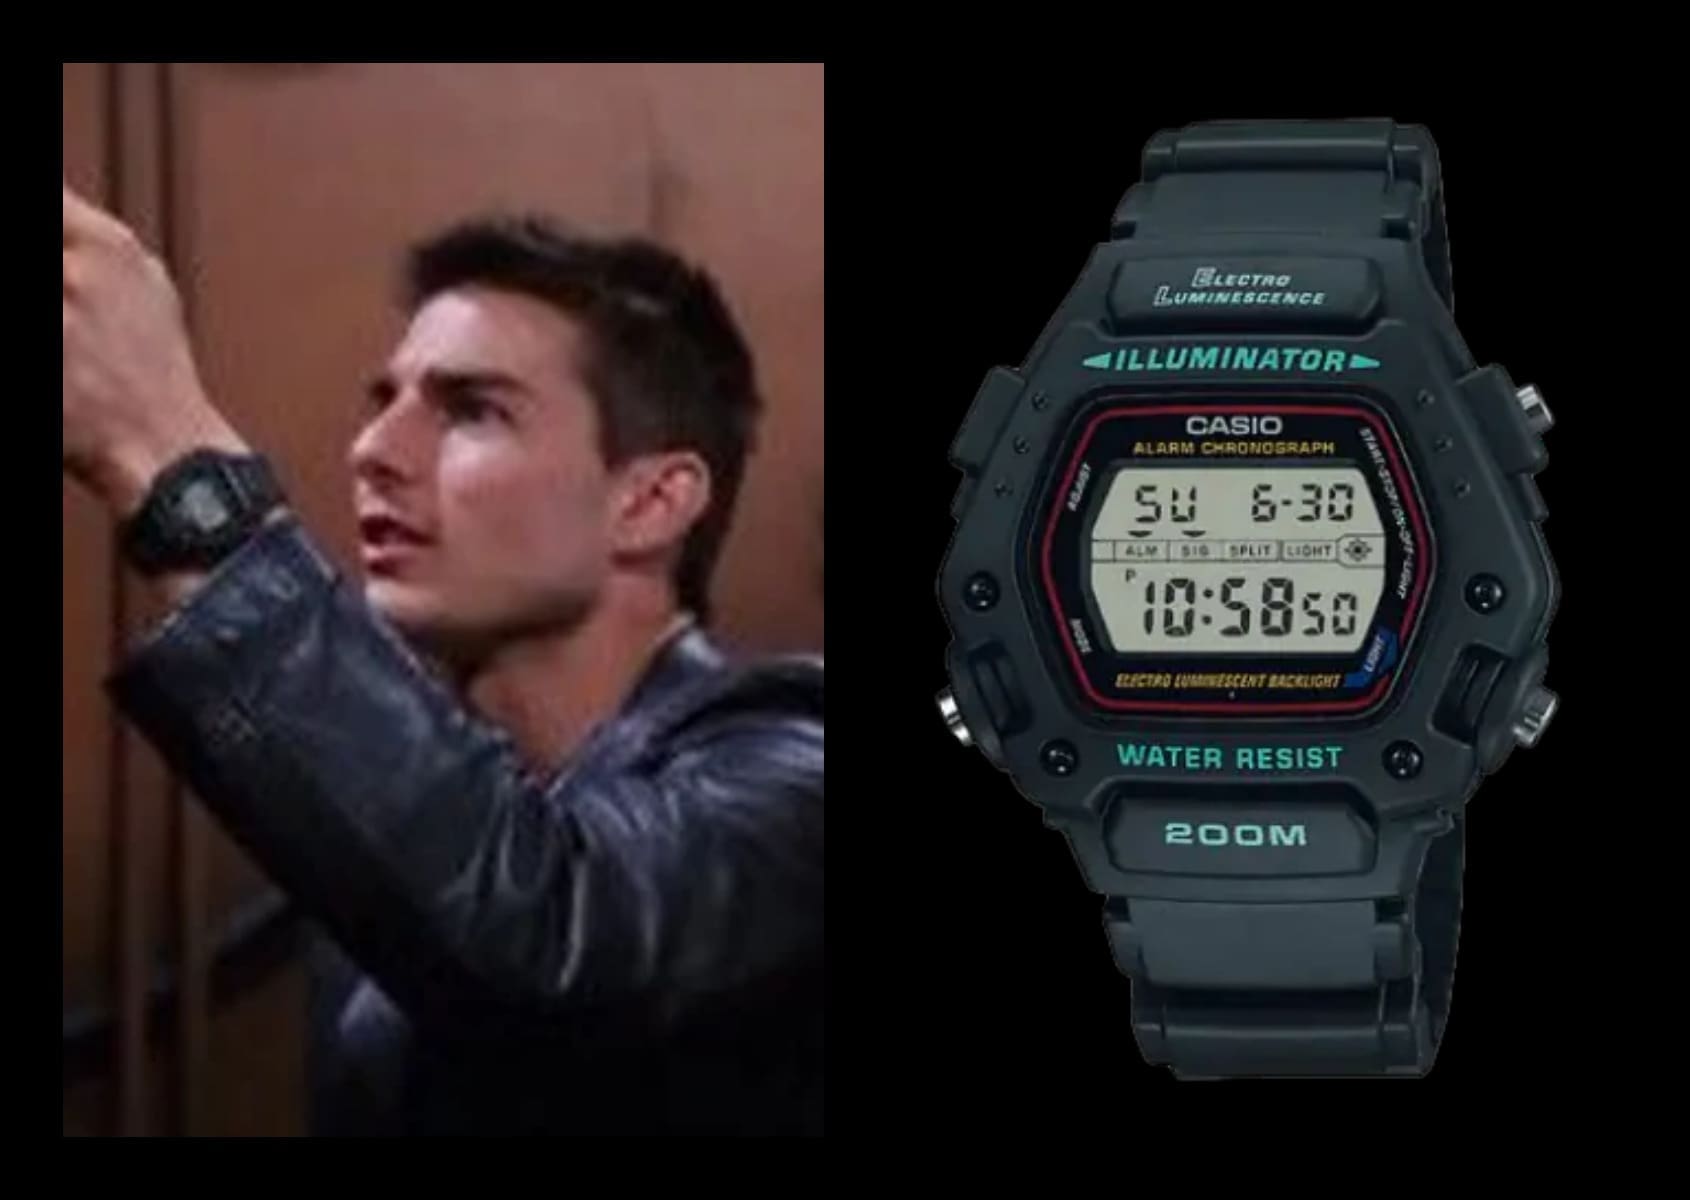 Five of the best action-movie watches you can still buy at retail